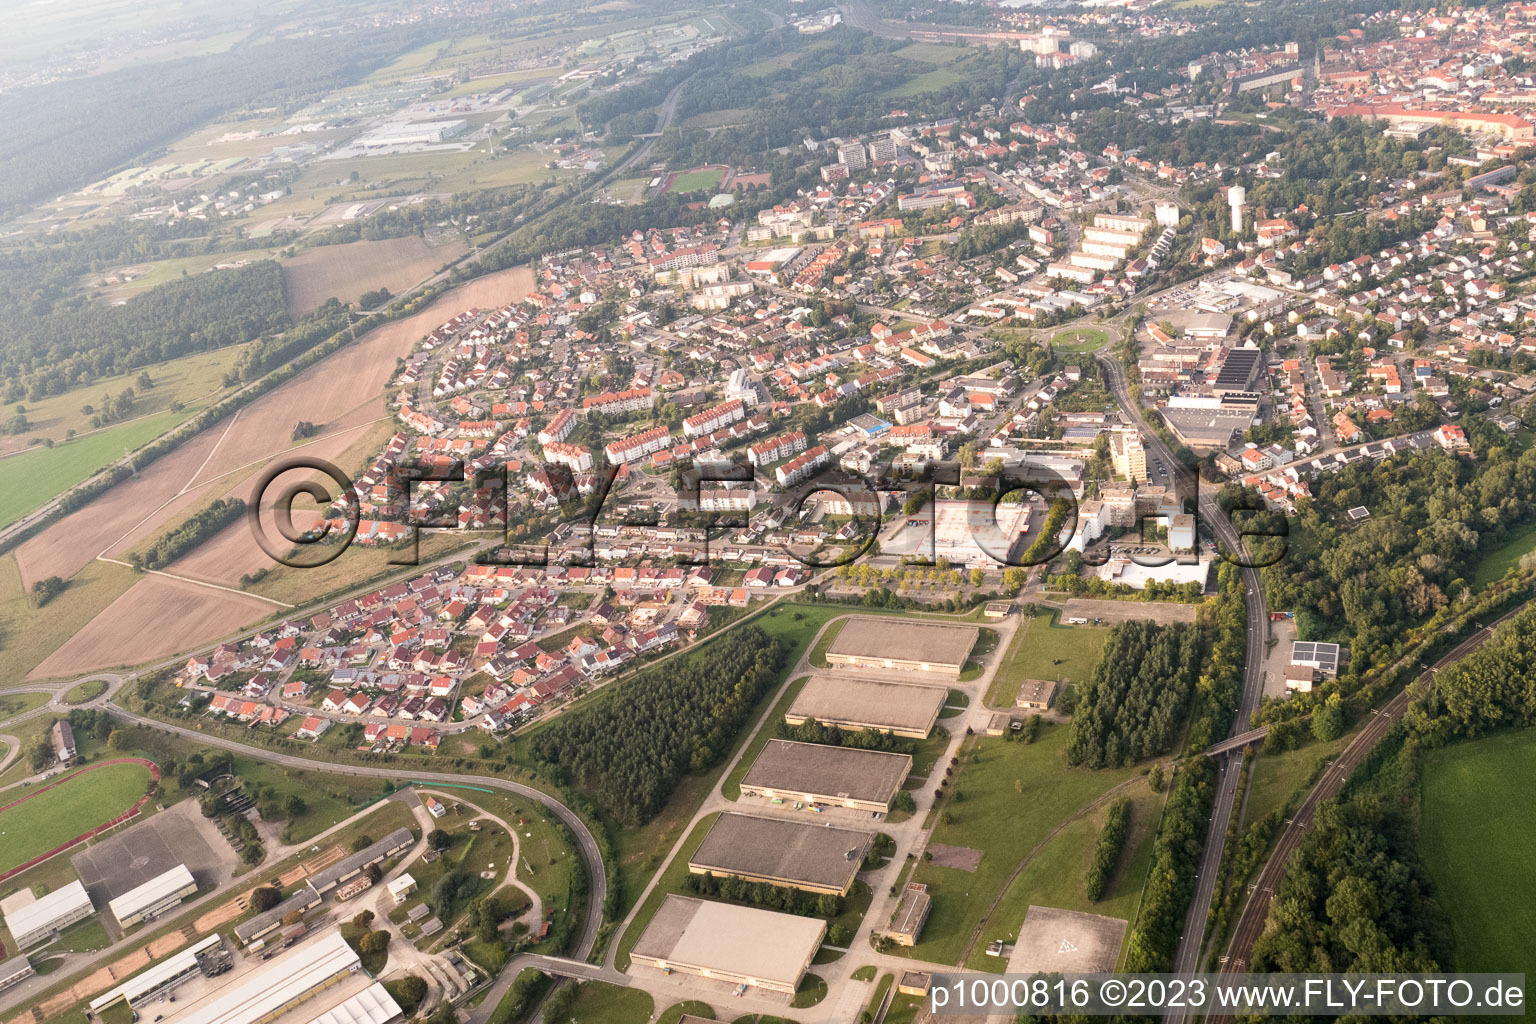 Germersheim in the state Rhineland-Palatinate, Germany viewn from the air